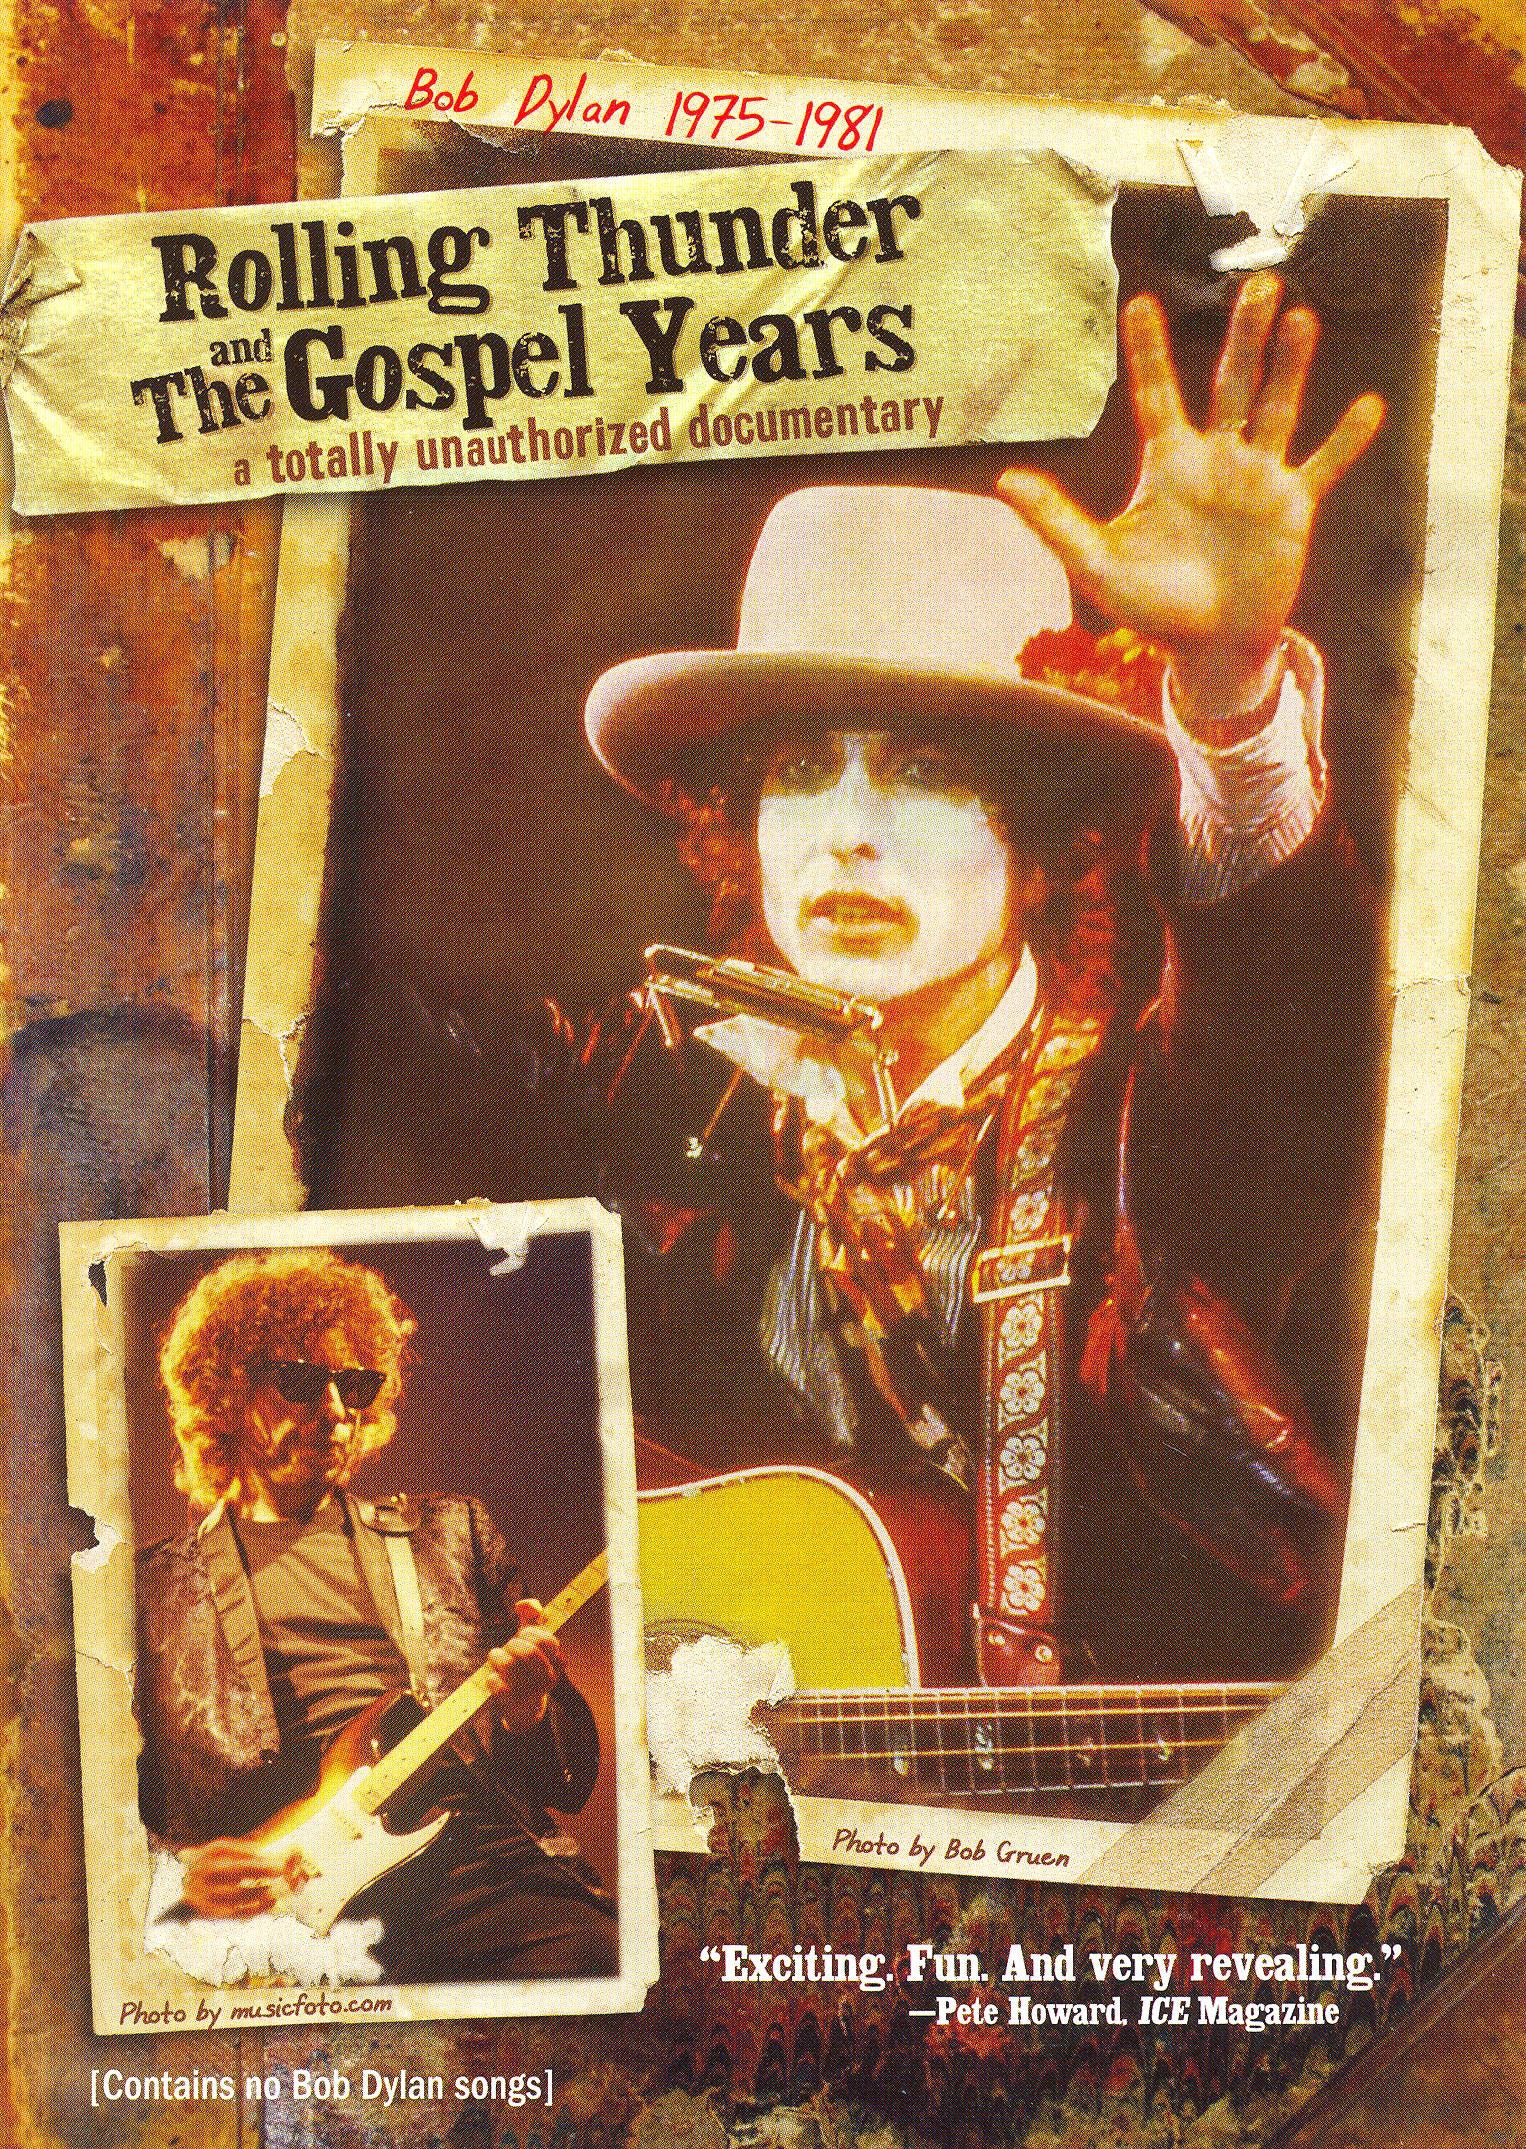 Bob Dylan 1975-1982: Rolling Thunder and the Gospel Years cover art